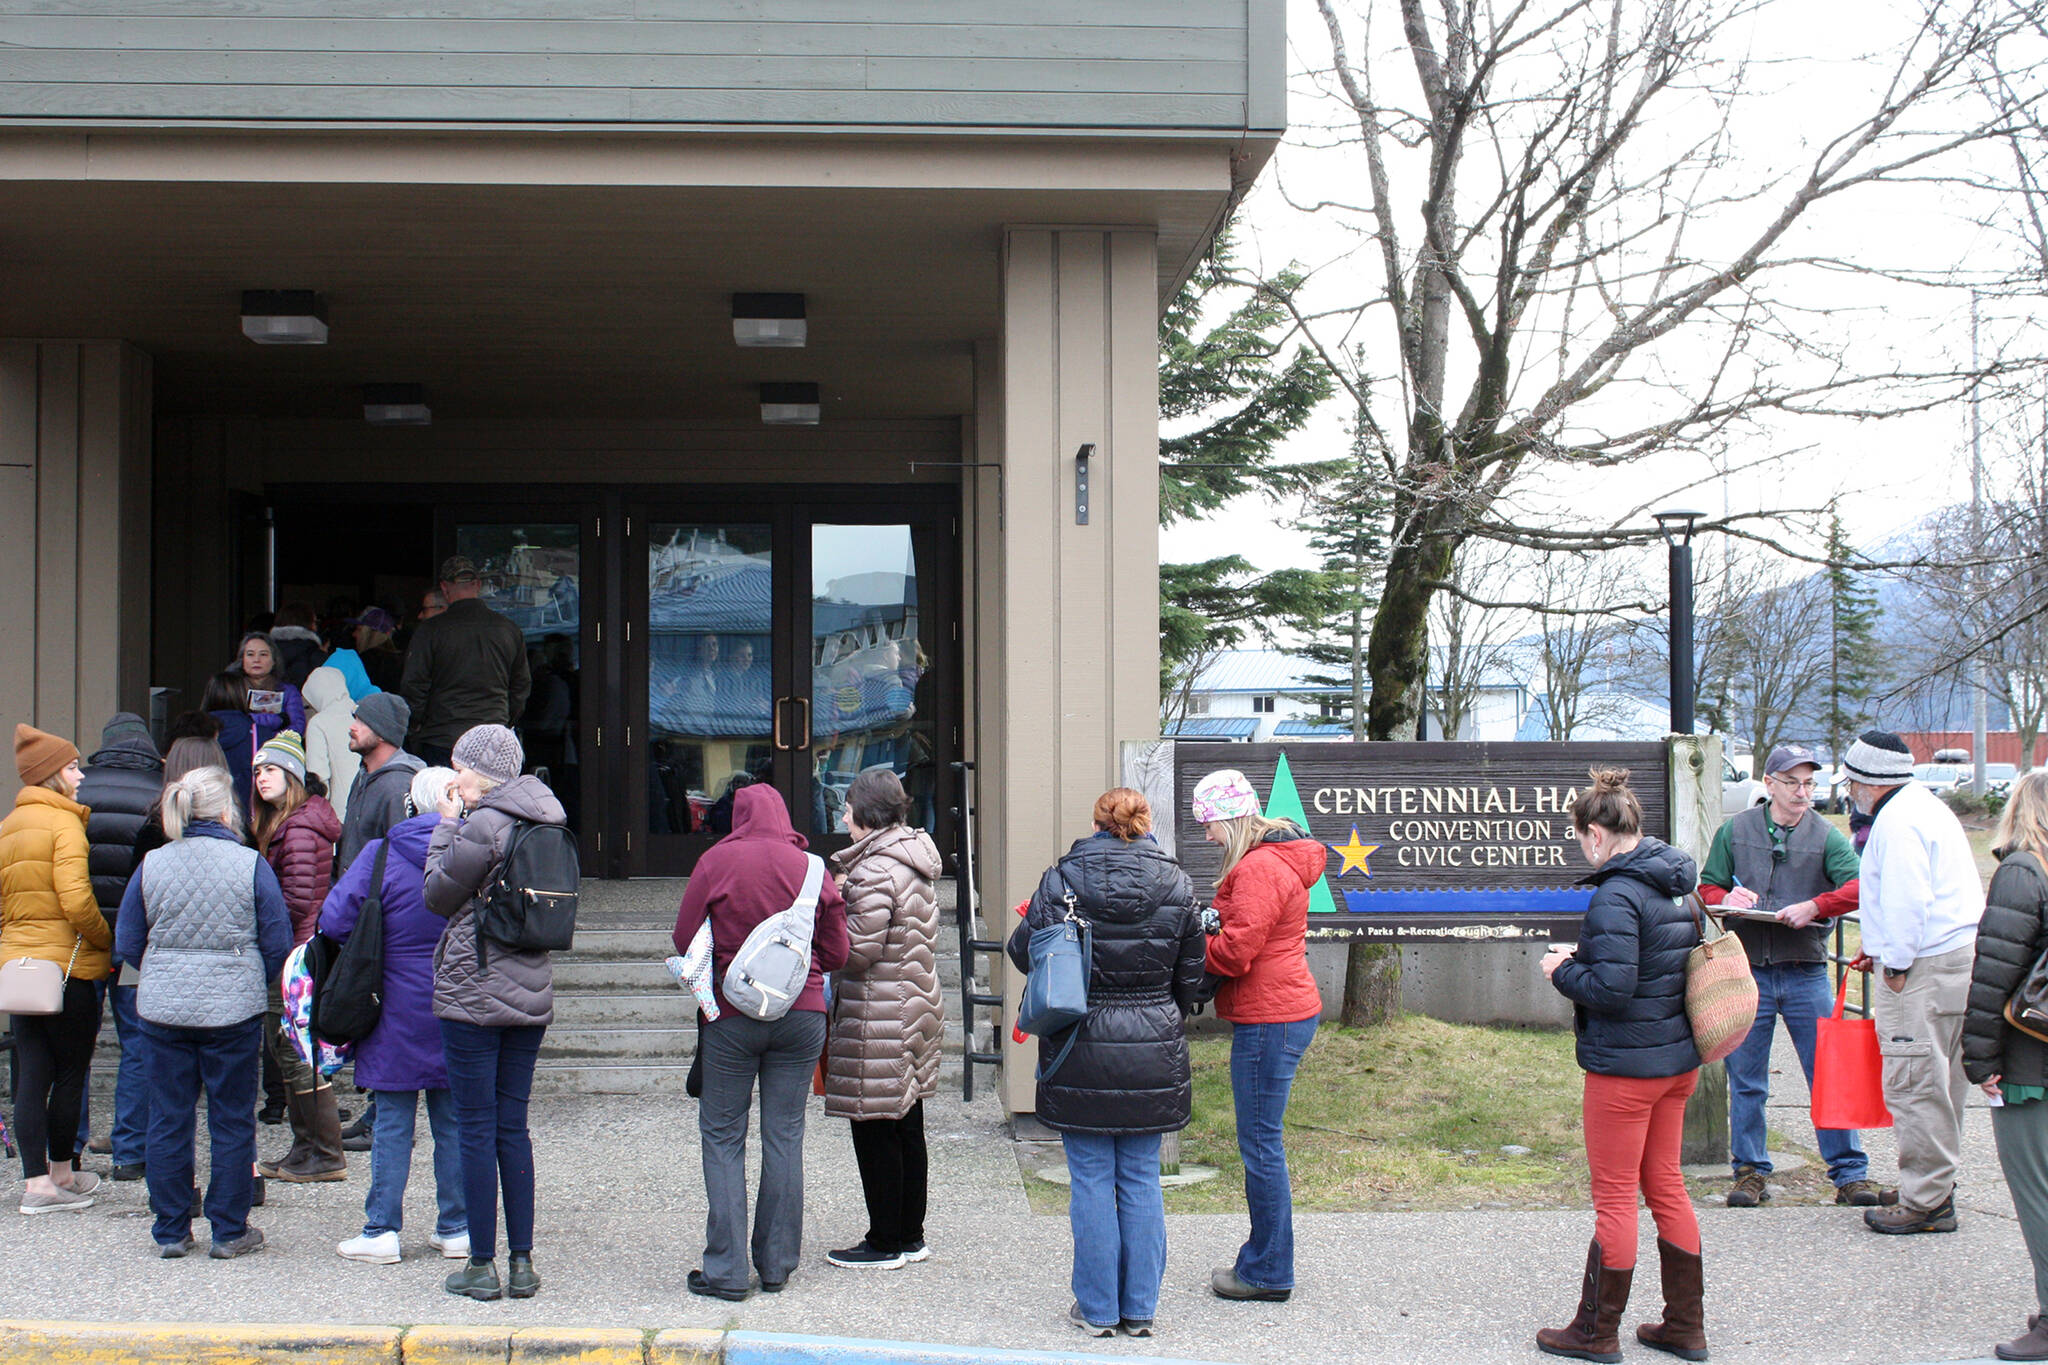 A line forms outside Centennial Hall ahead of Juneau Public Market, Nov. 29, 2019. After a year off because of the pandemic, the market is returning this year with COVID-19 mitigation measures in place. (Ben Hohenstatt / Juneau Empire File)